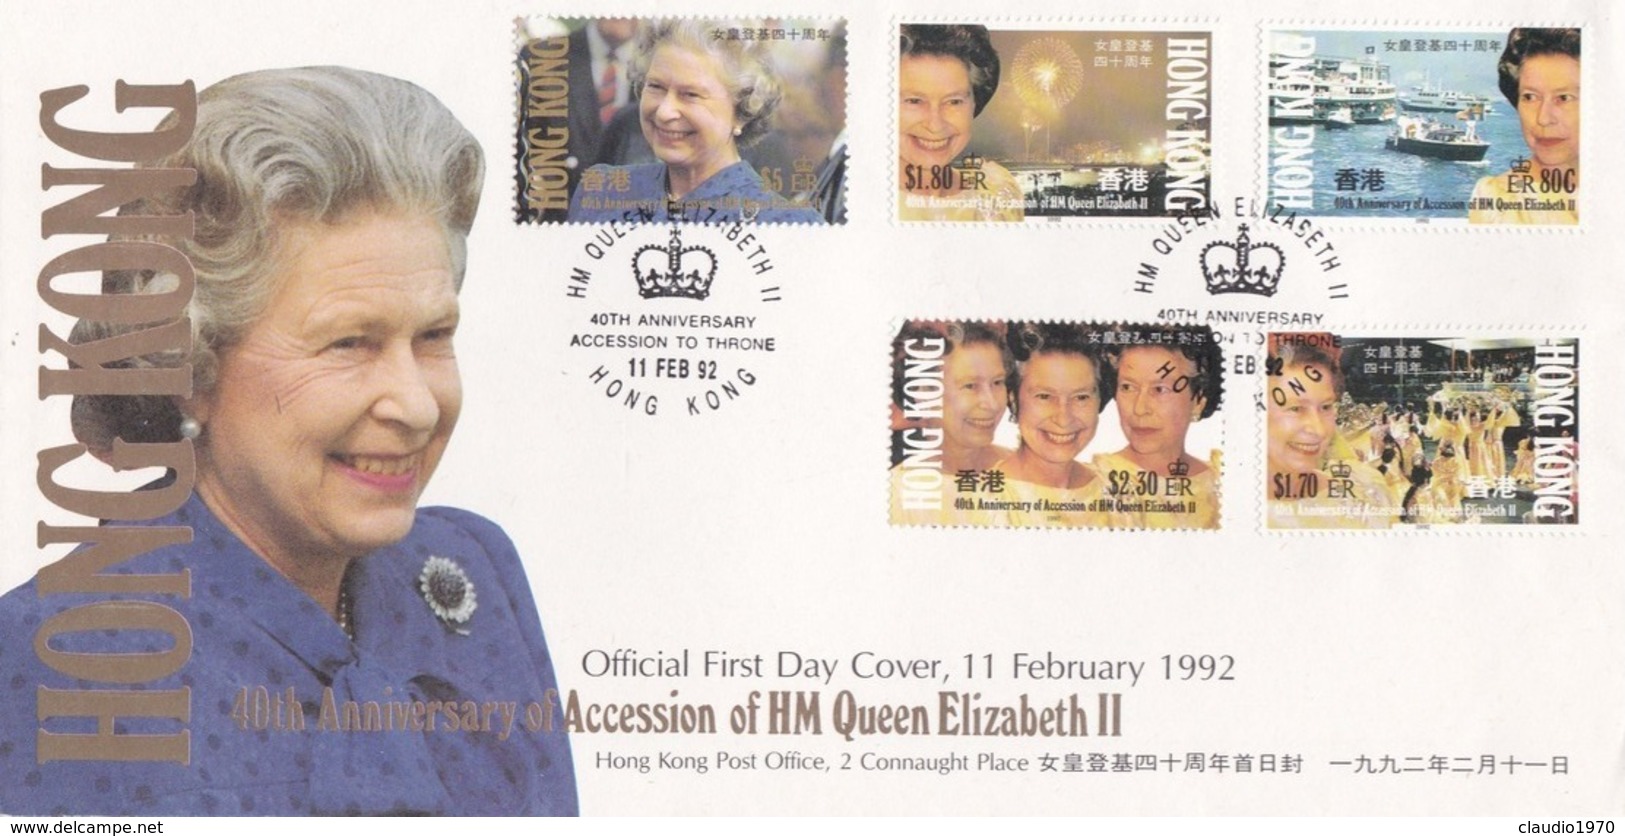 HONG KONG - F.D.C. - BUSTA PRIMO GIORNO - 40TH ANNIVERSARY OF ACCESSION OF HM QUEEN ELIZABERT II - 1992 - FDC